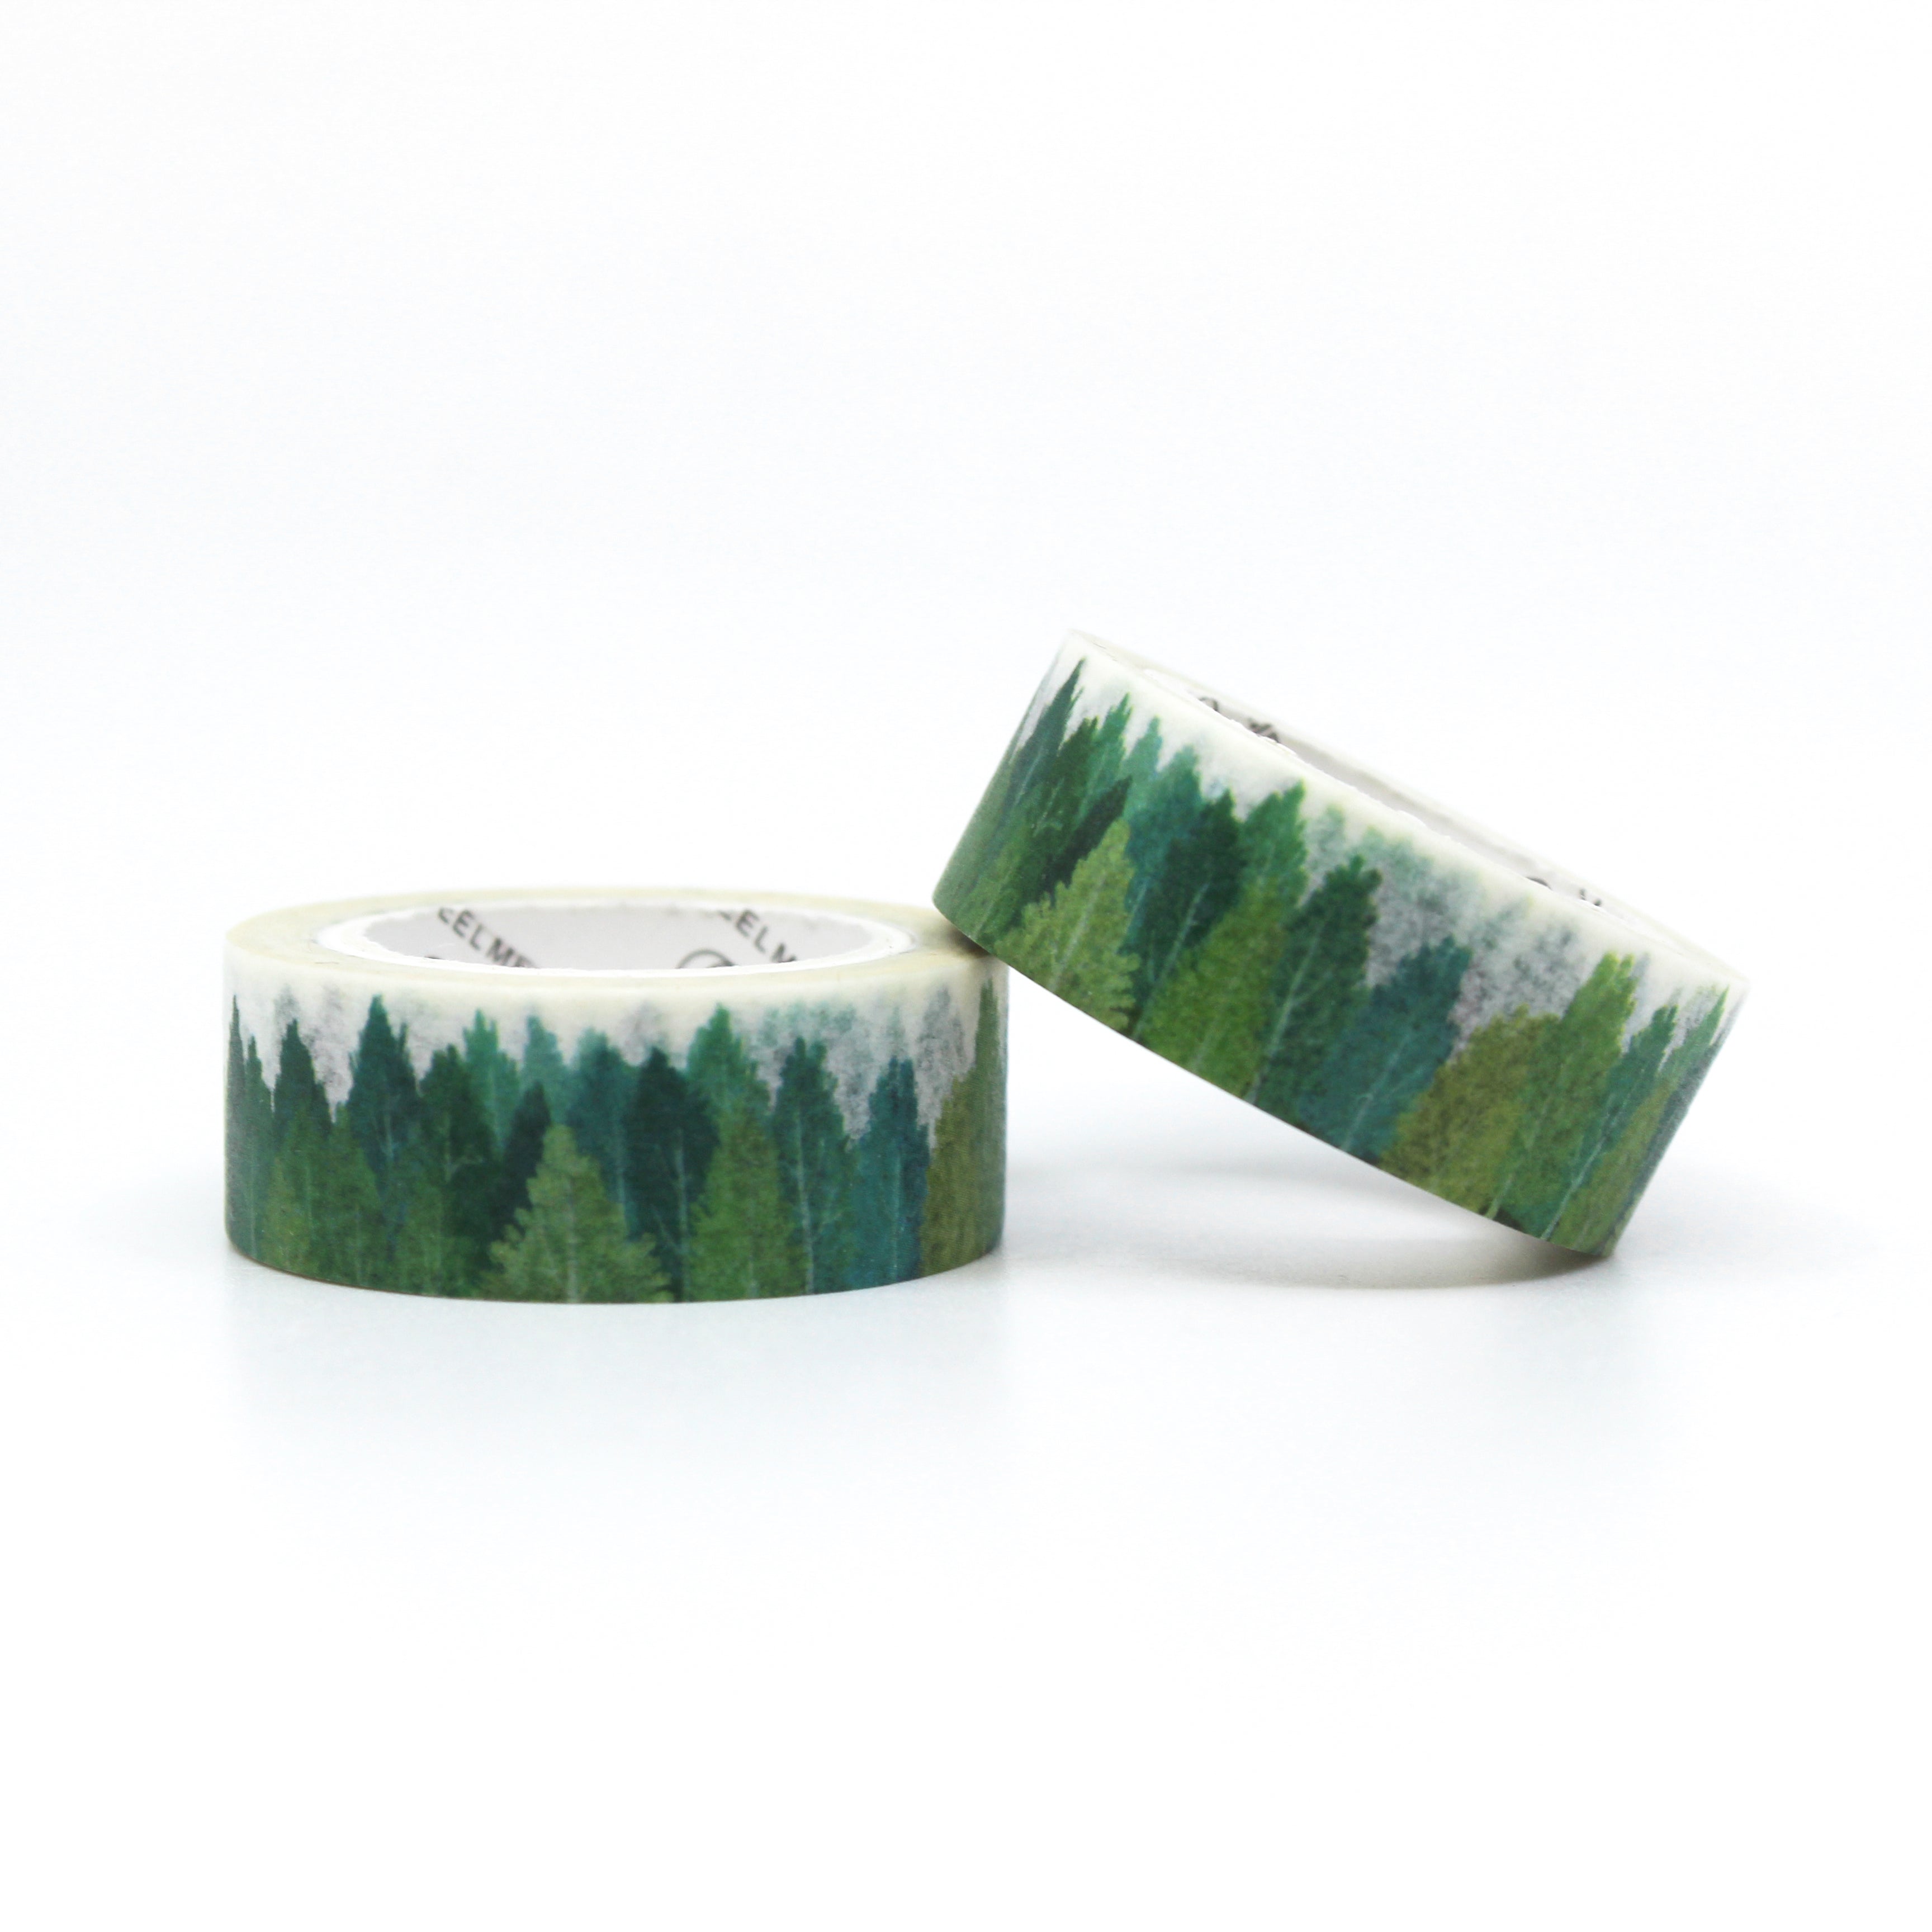 This is a nice view of green layered forest landscape tree washi tape for Journal Supplies, Scrapbooking washi tapes from BBB Supplies Craft Shop